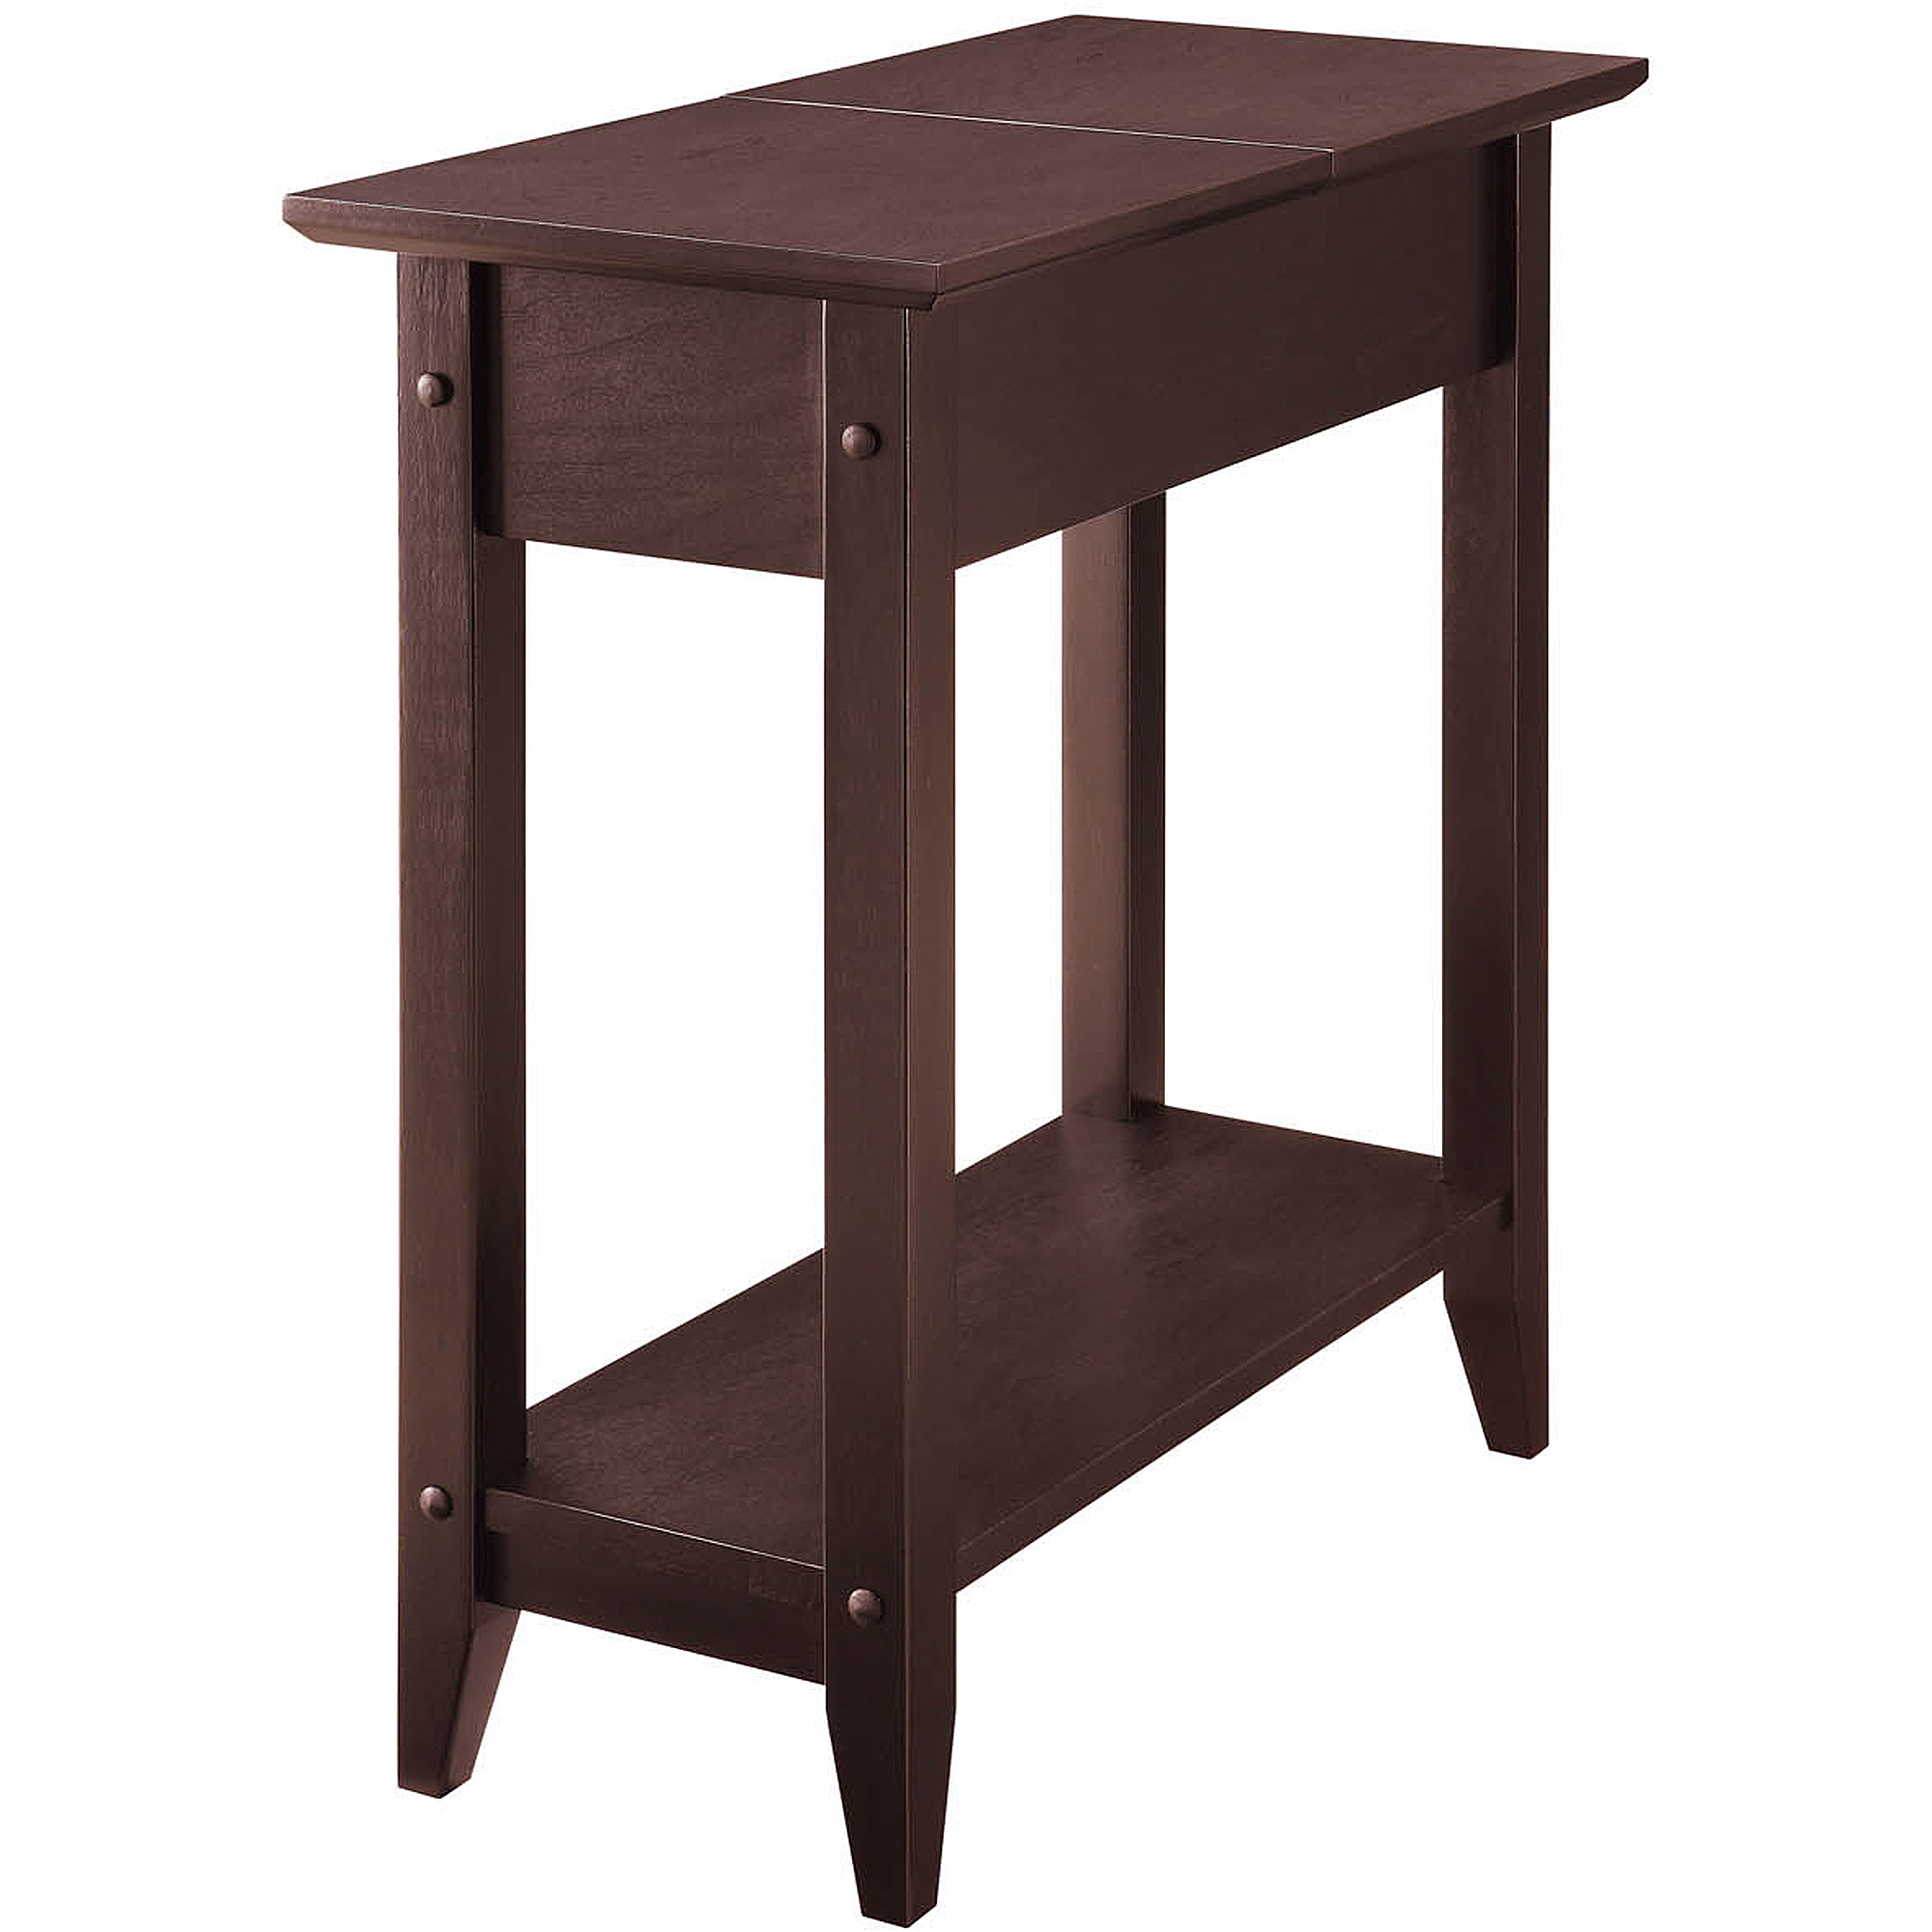 Very narrow end table